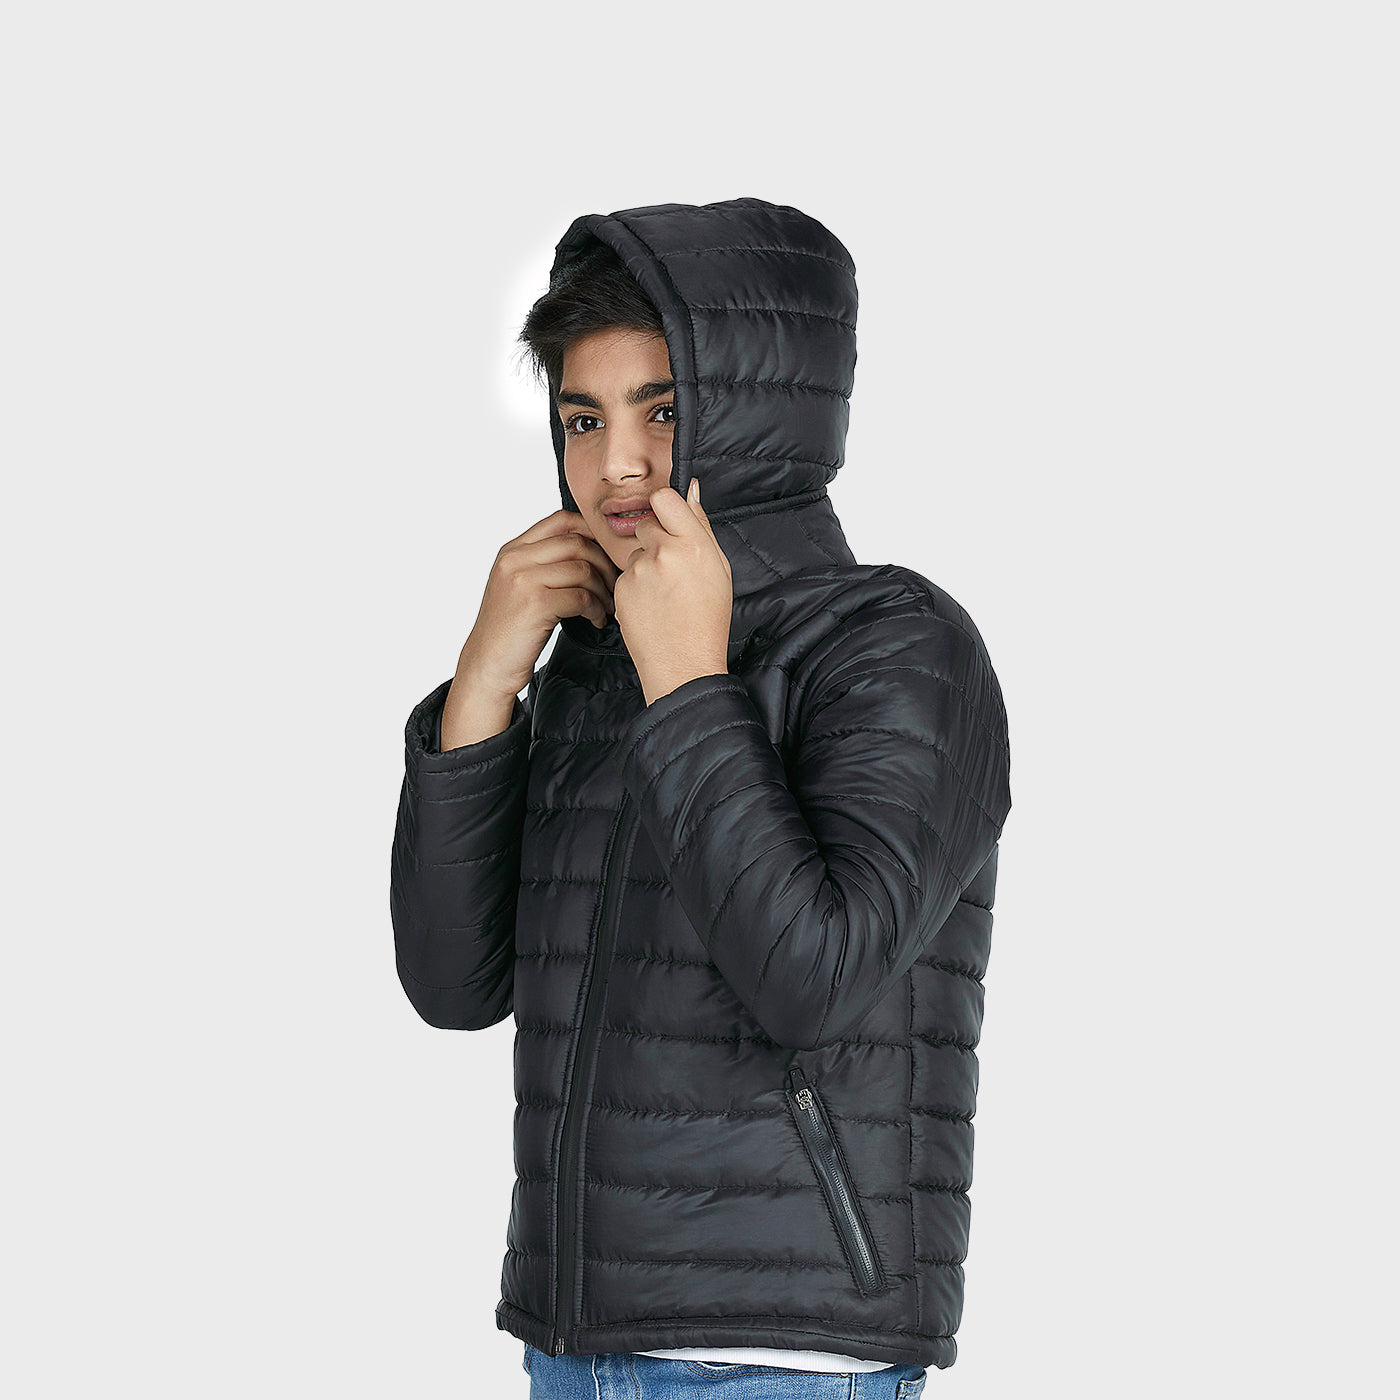 Hooded Puffer Jacket for Boys